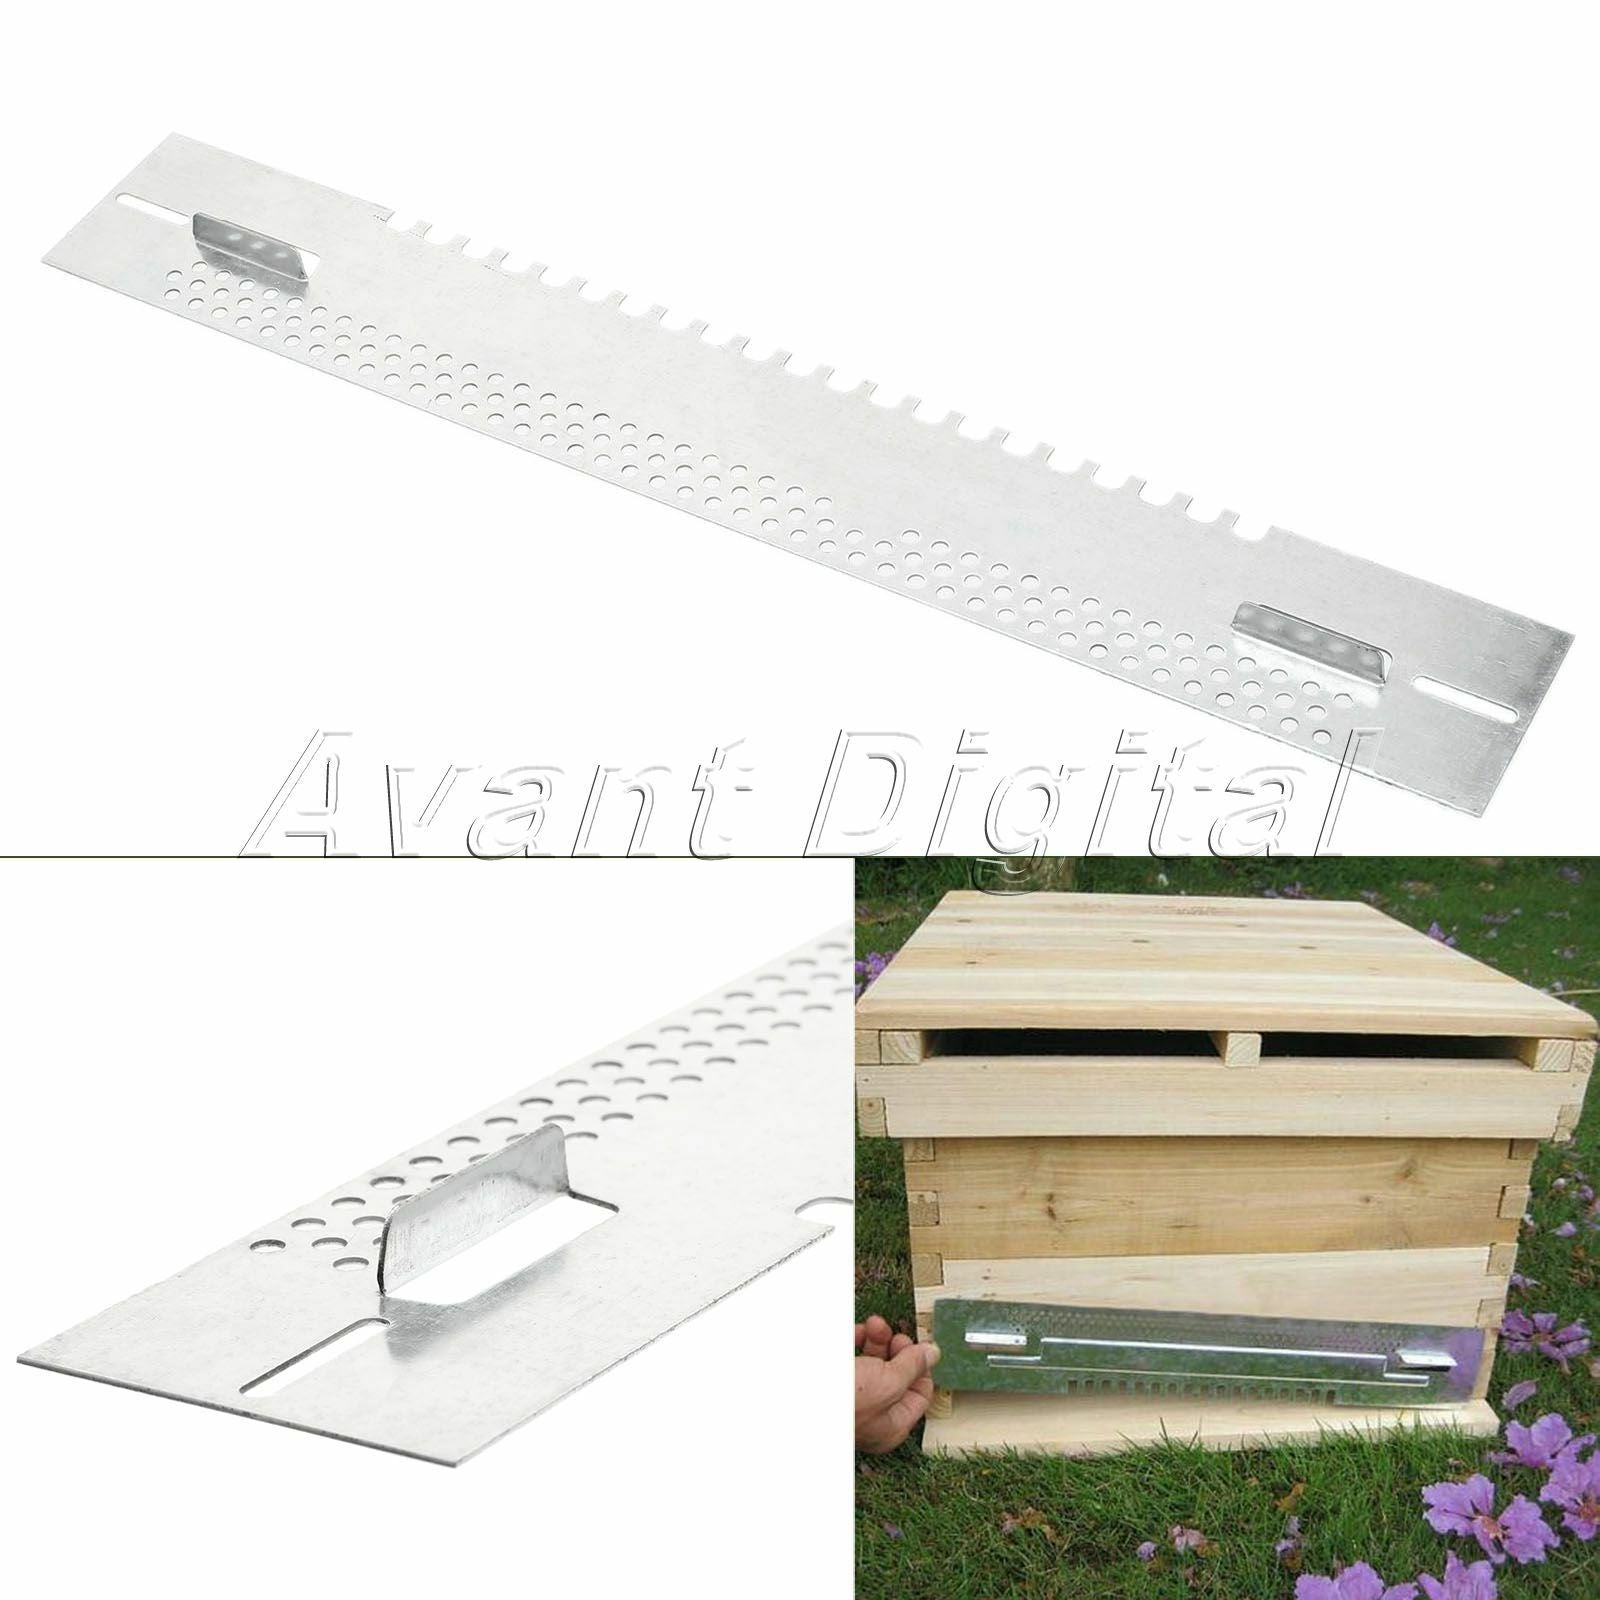 Queen Bee Hive sliding Mouse guards / Travel gates Beekeeping Equipment Tool